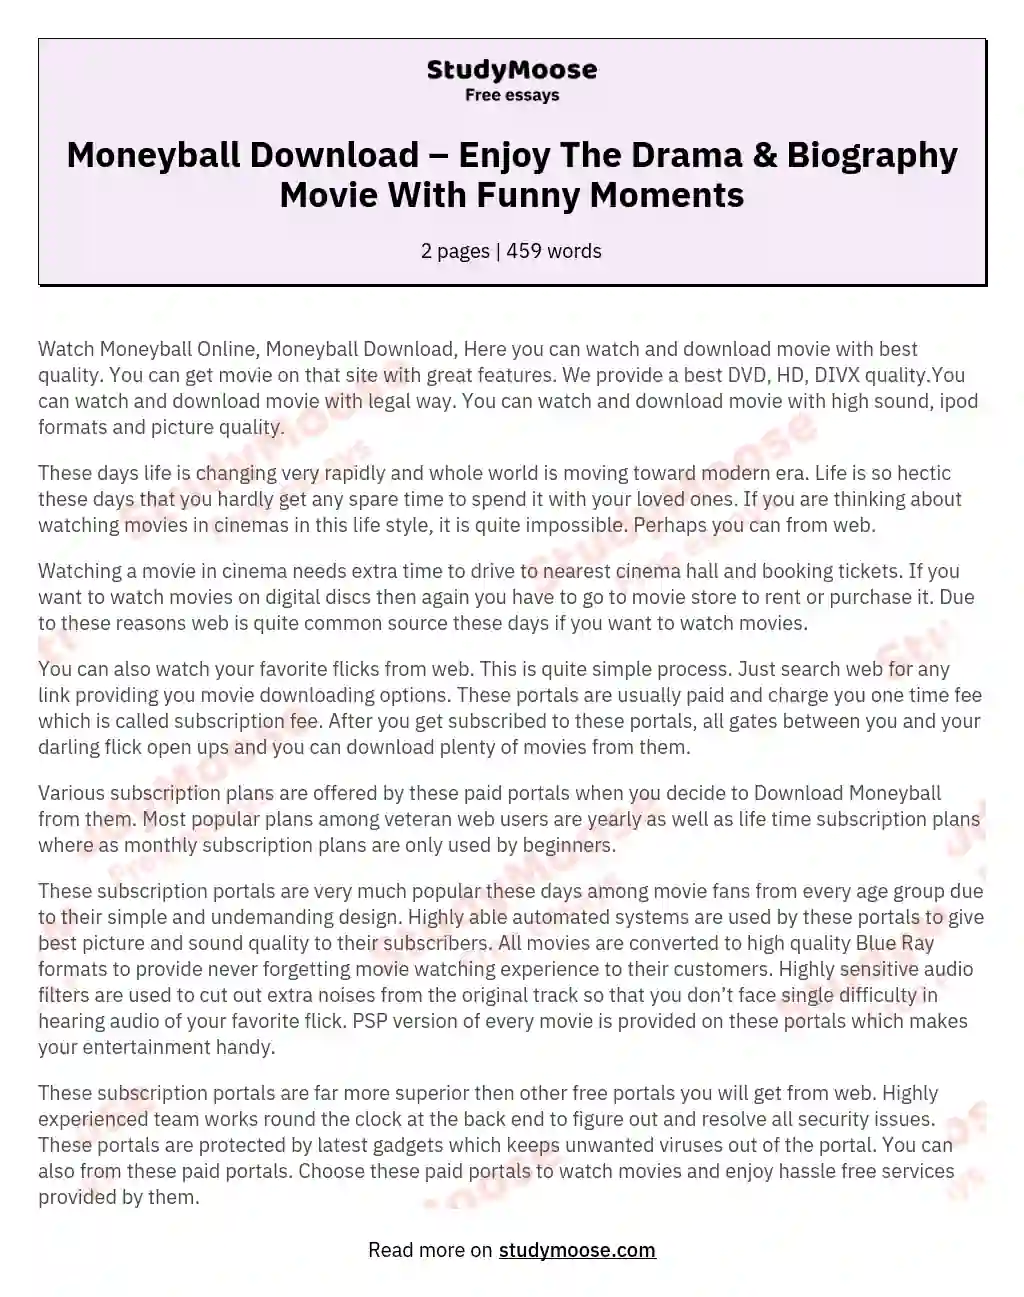 Moneyball Download – Enjoy The Drama & Biography Movie With Funny Moments